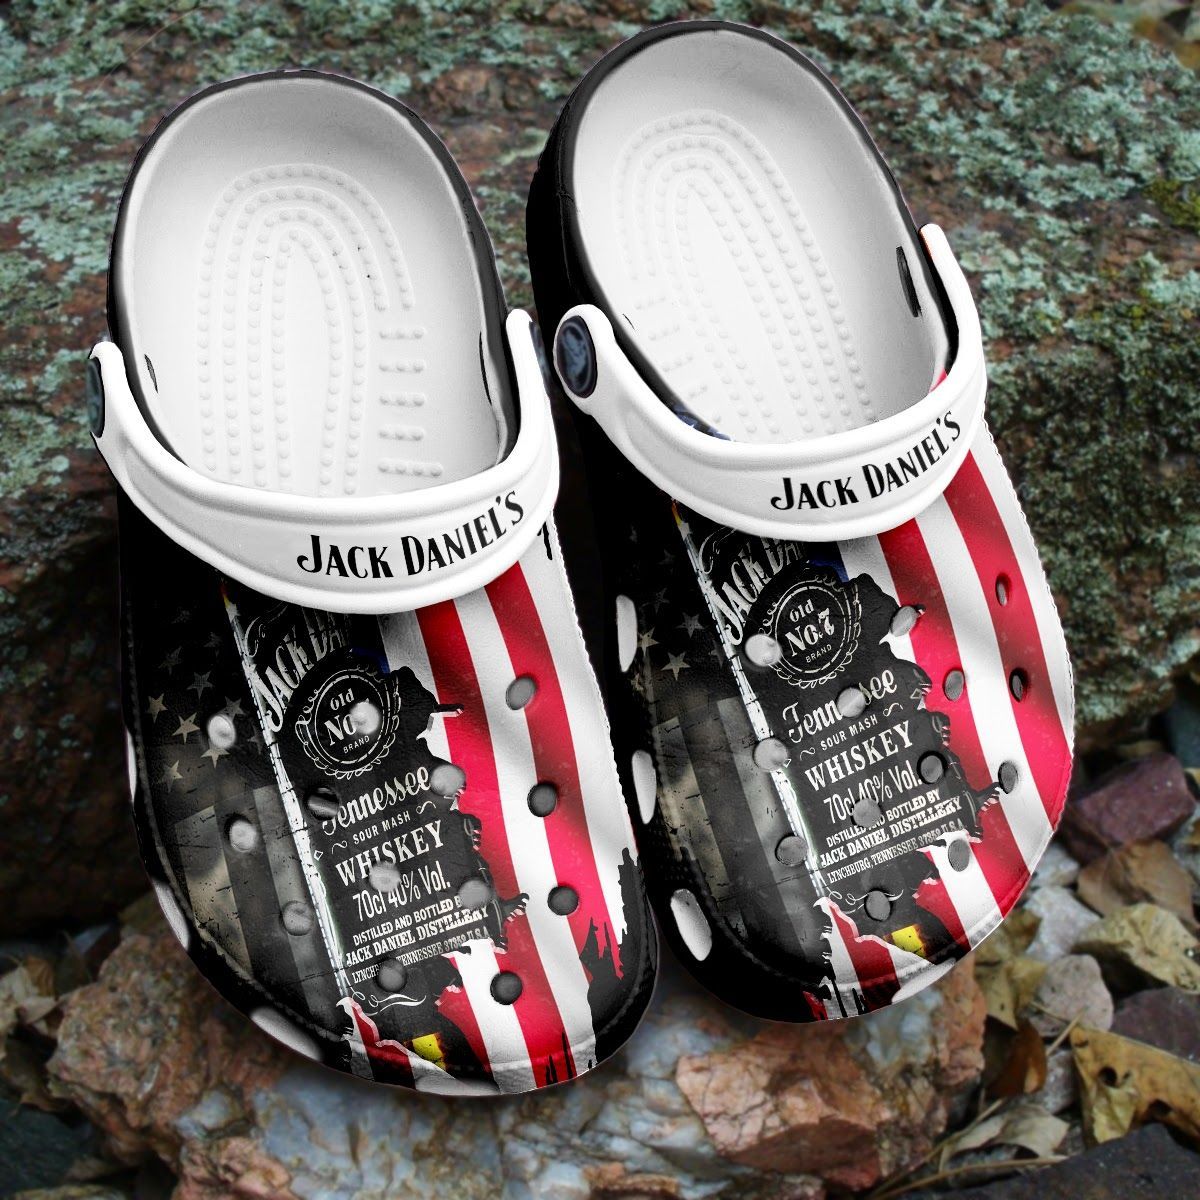 If you'd like to purchase a pair of Crocband Clogs, be sure to check out the official website. 107